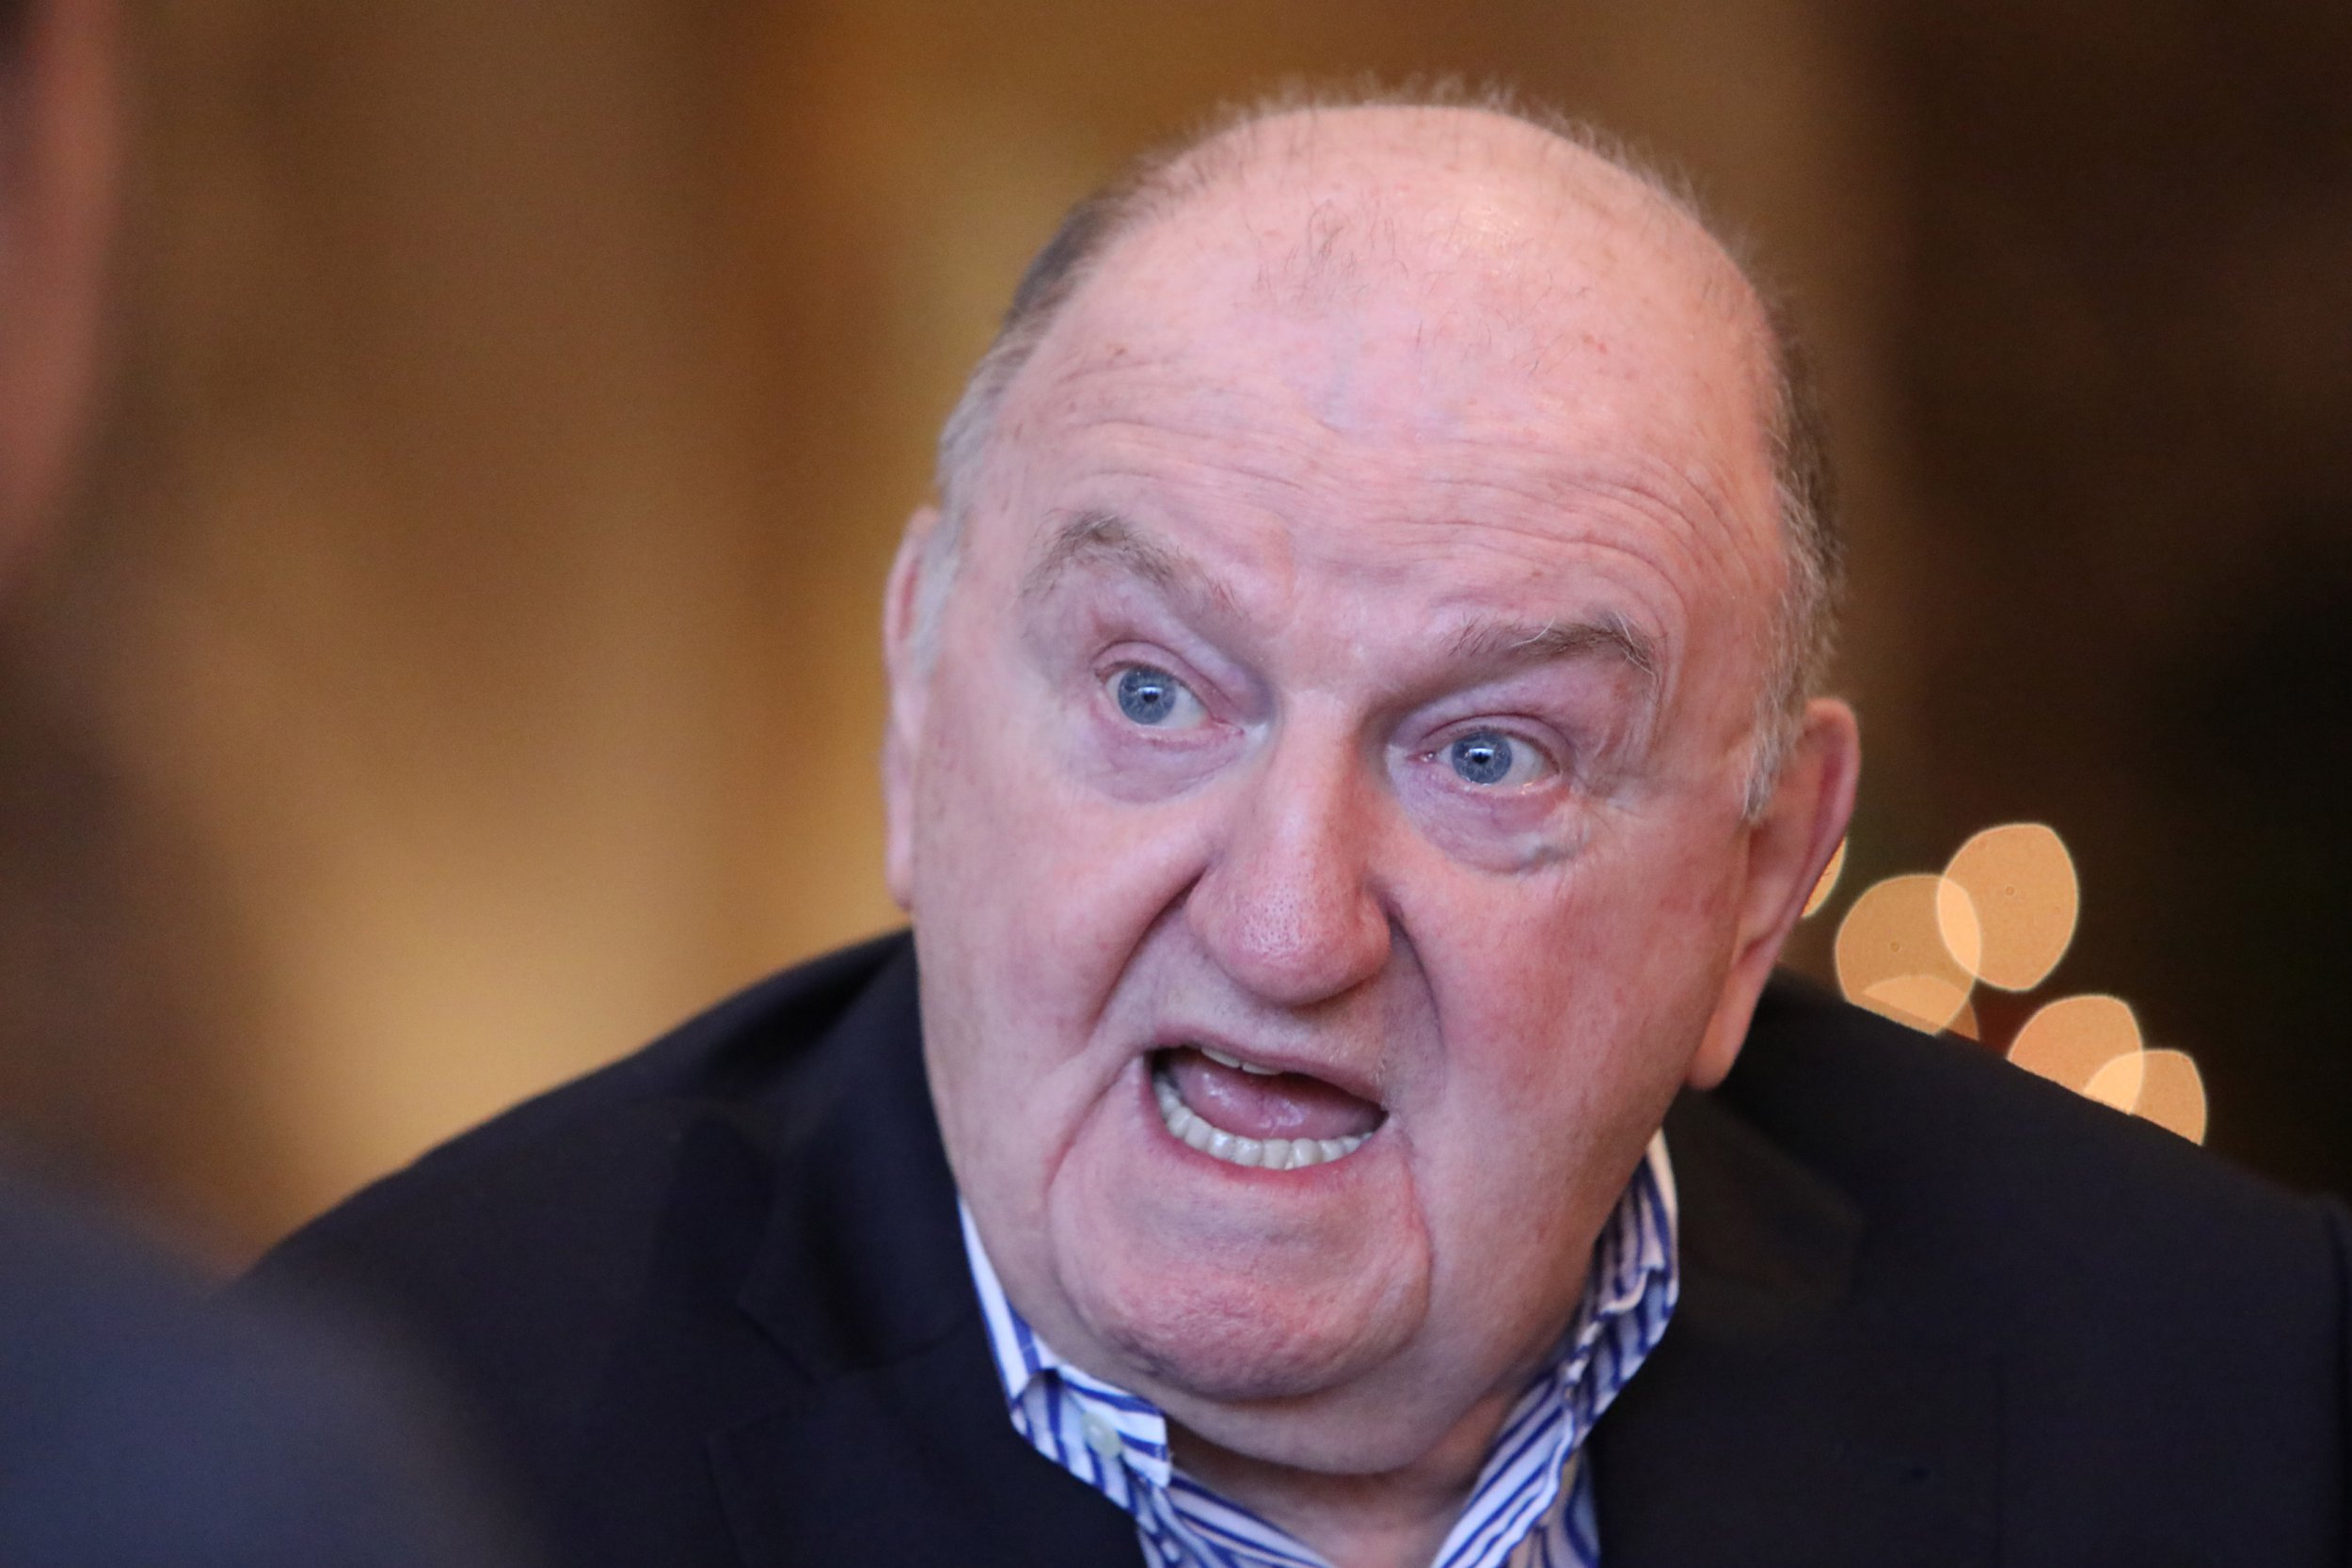 George Hook said he 'feels sorry' for the stars involved